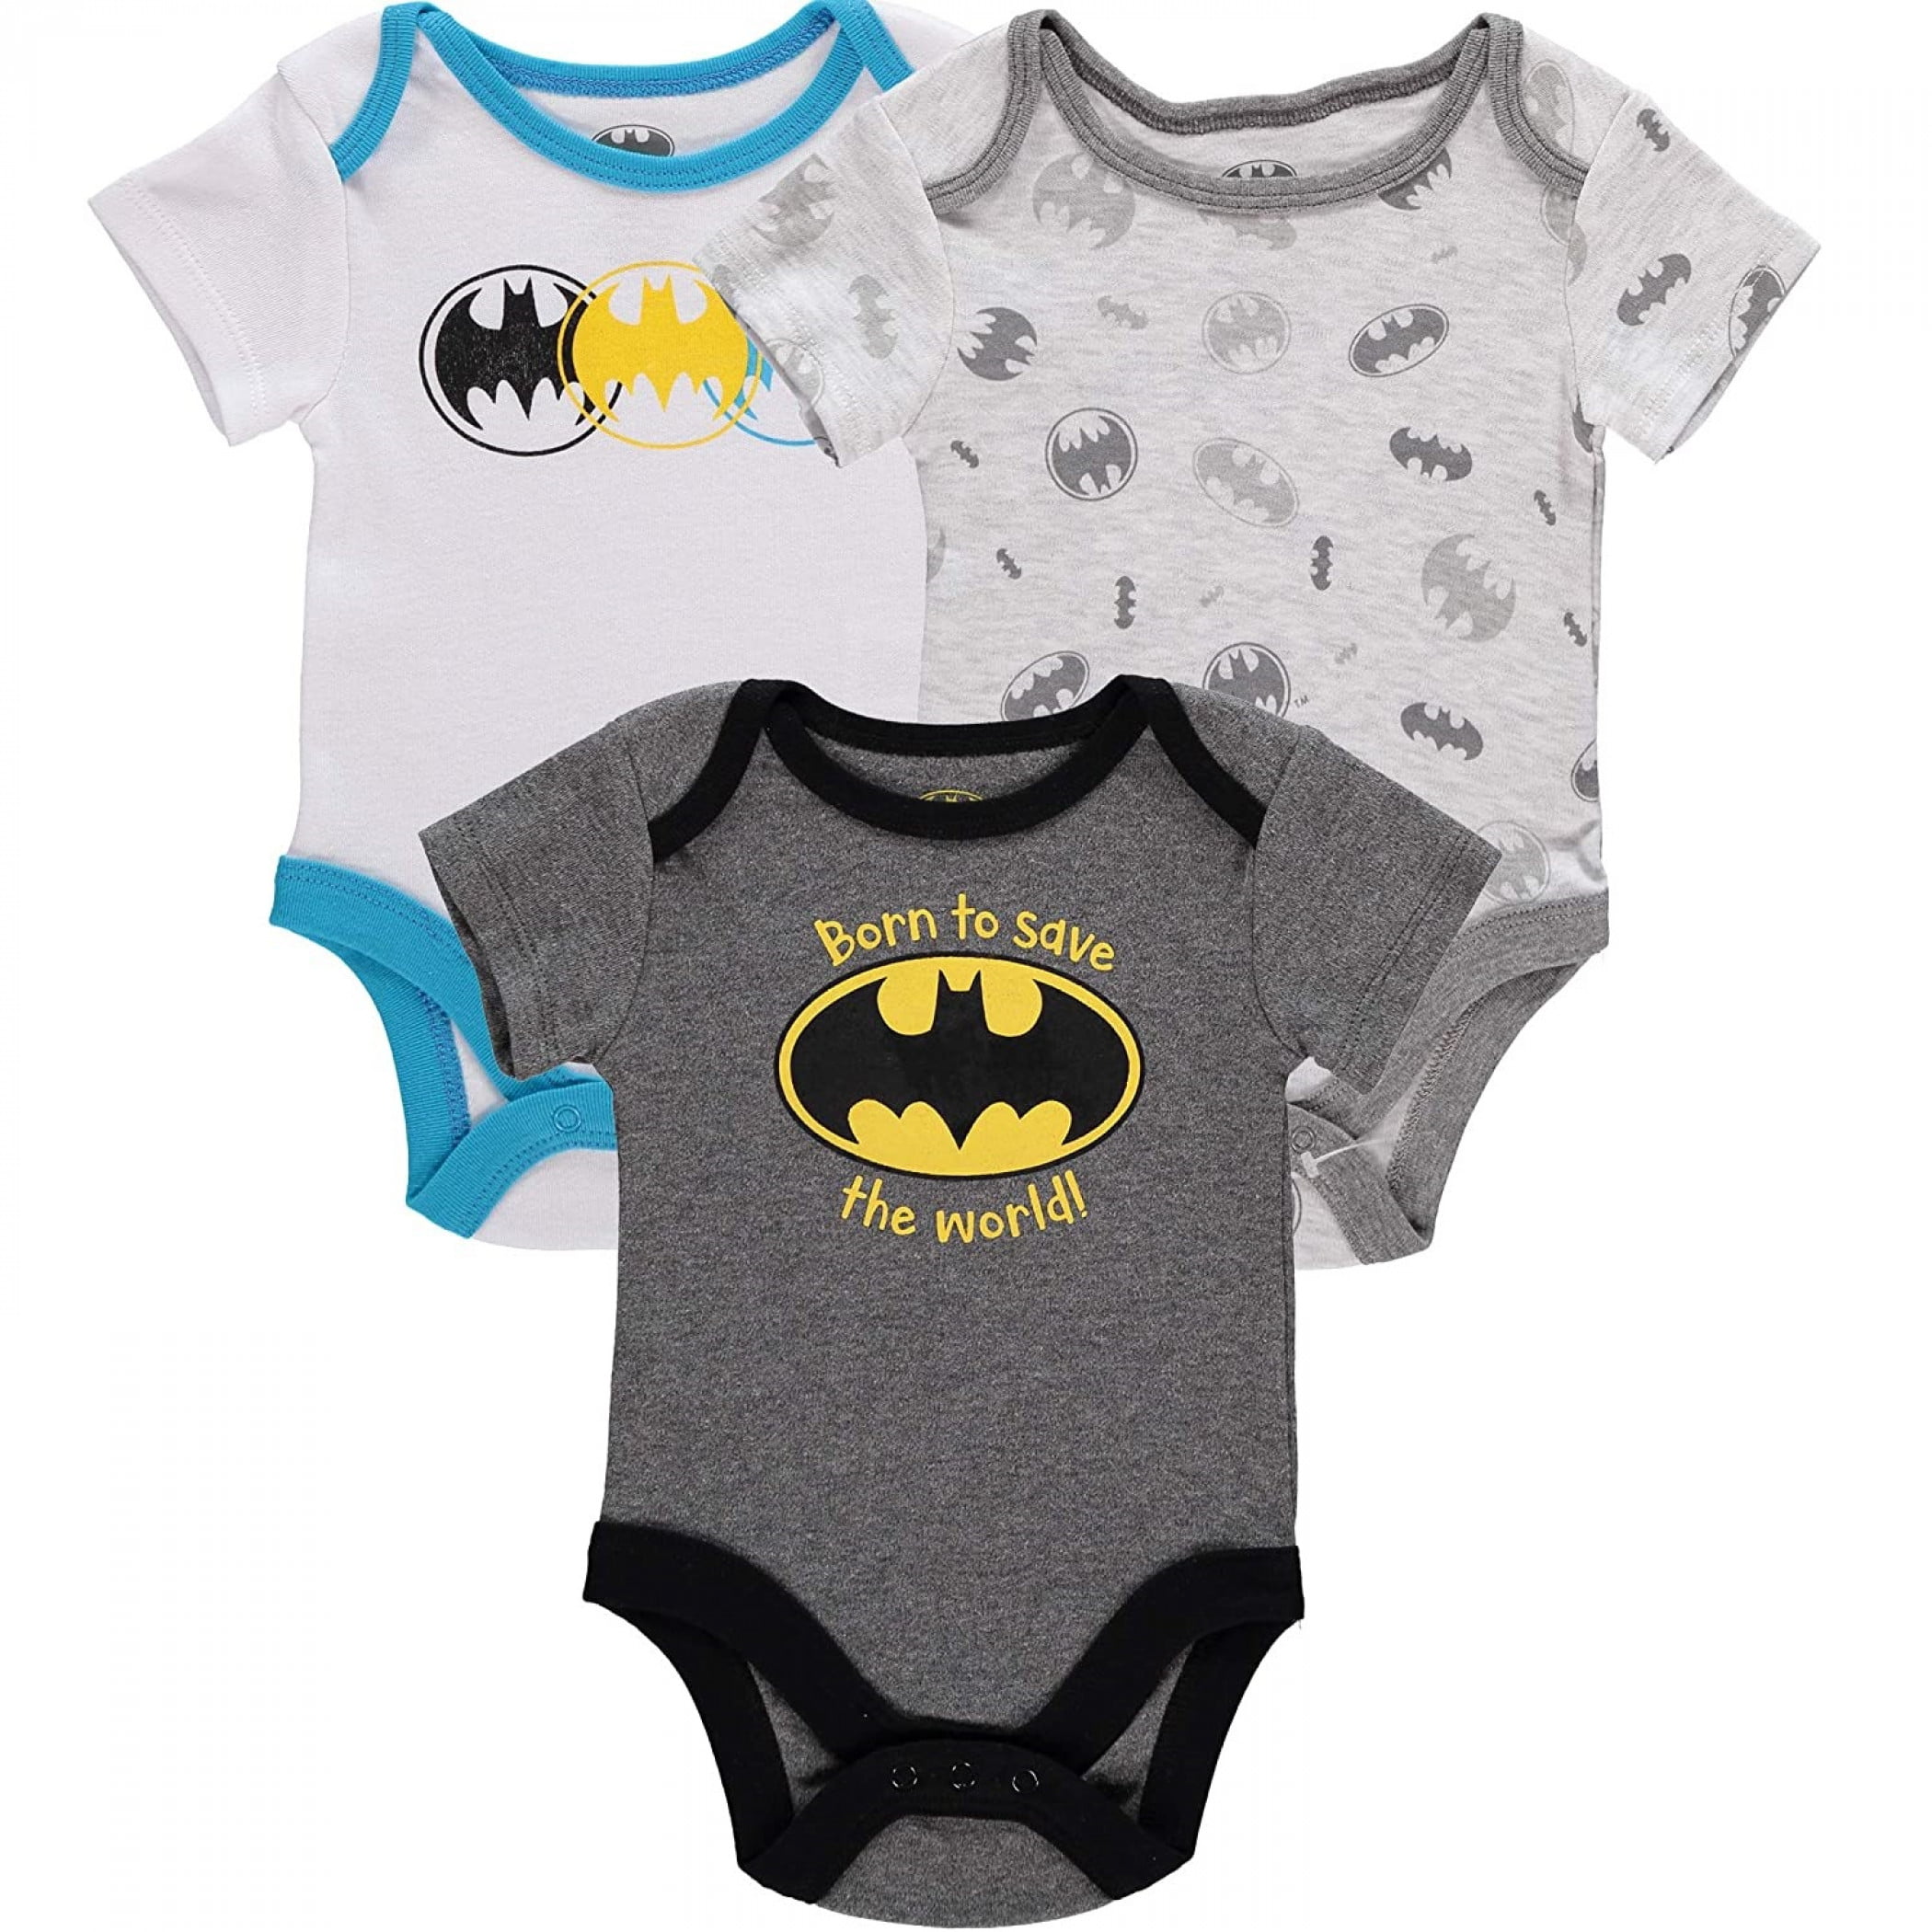 0-3 Month Newborn Baby Batman Outfit Costume Clothes Infant Tee One Piece Romper 